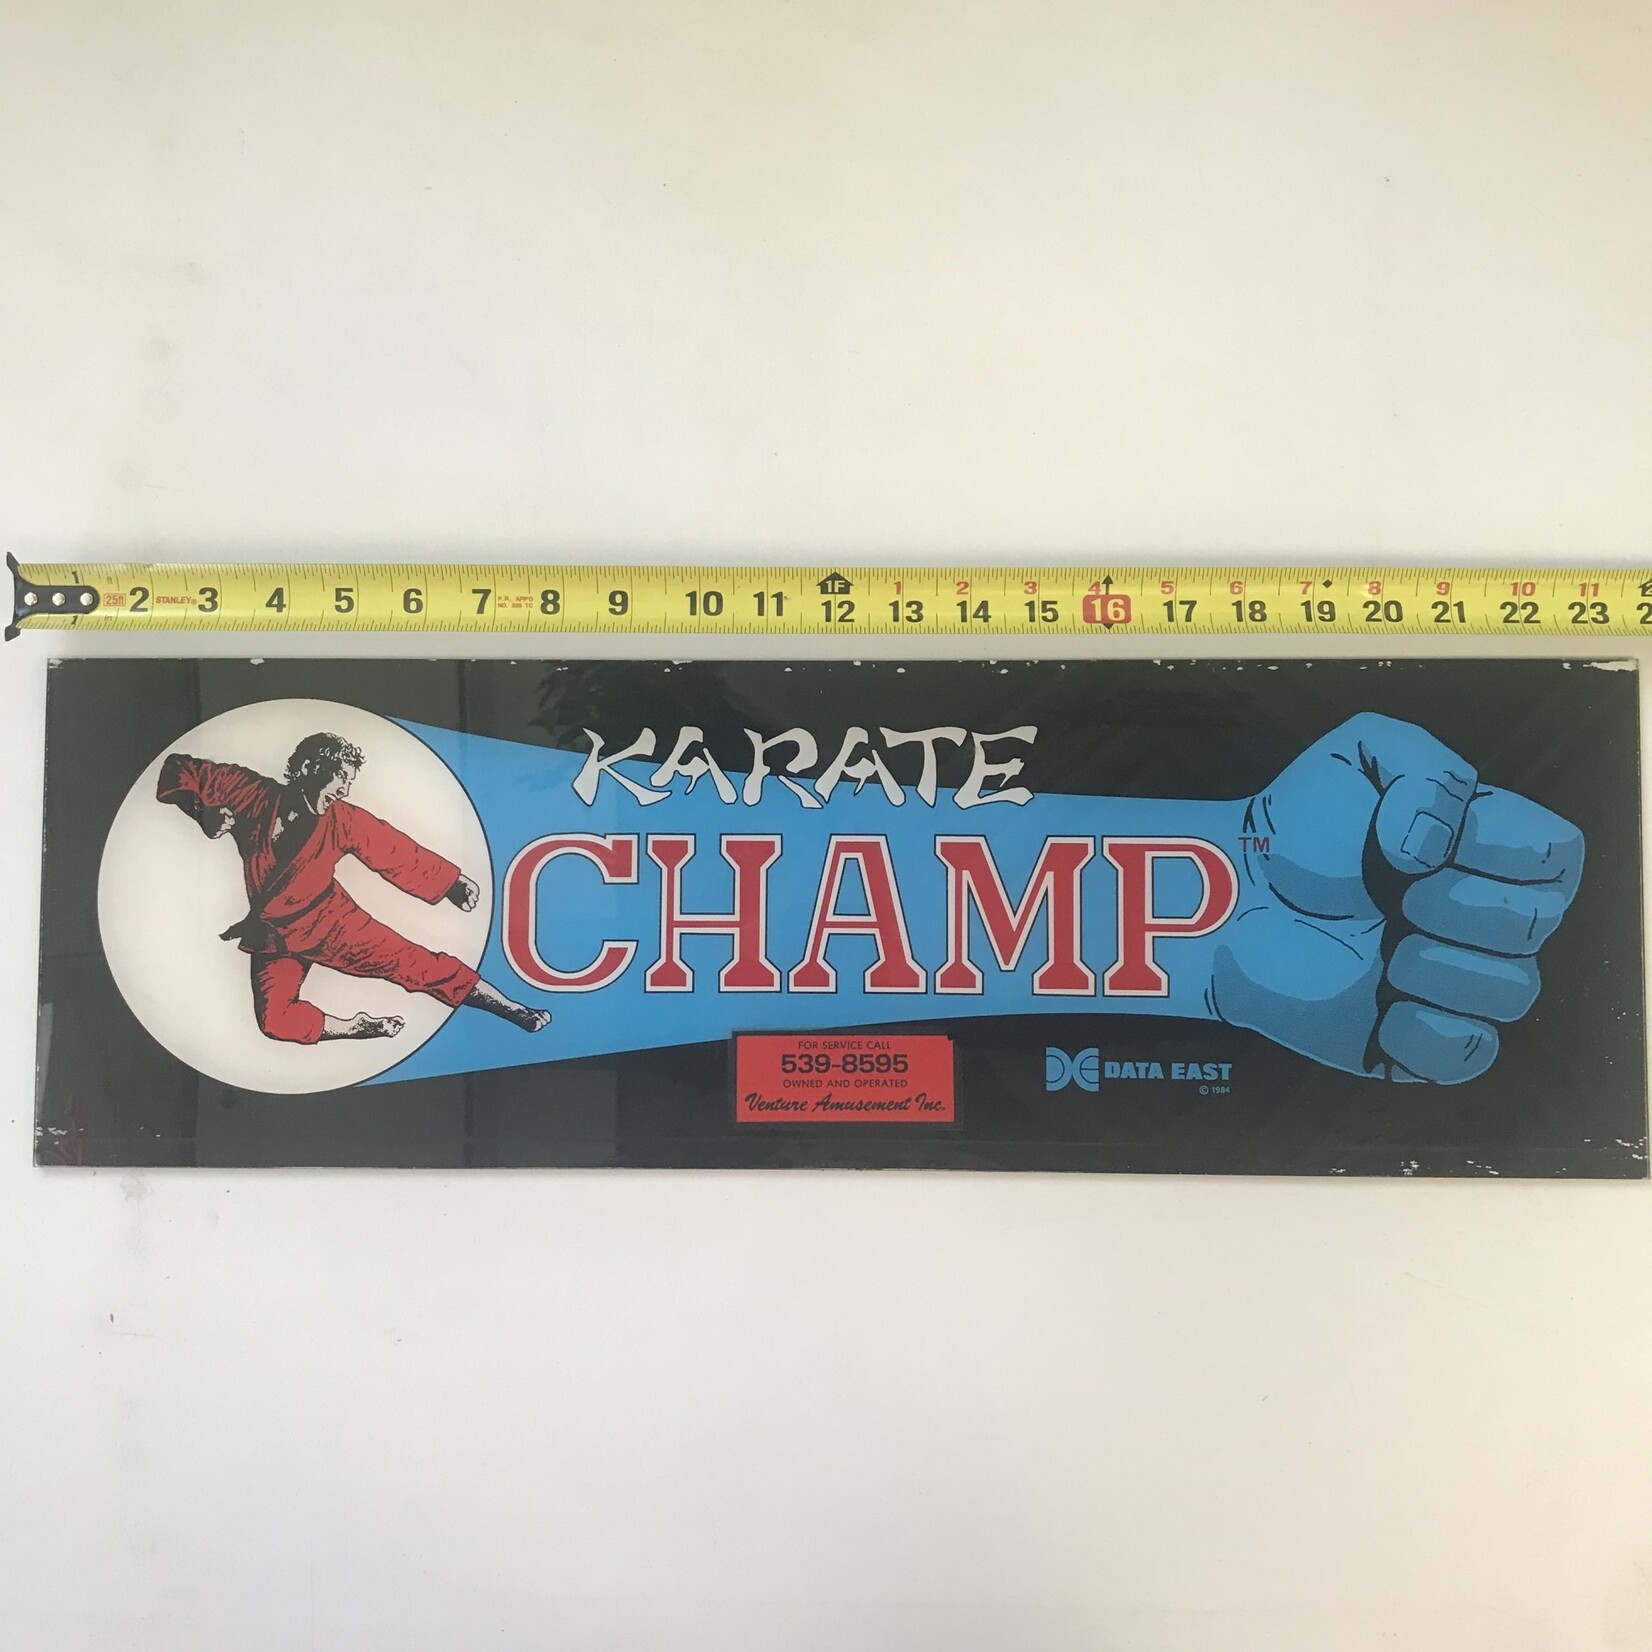 Karate Champ - Arcade Game Marquee (USED)